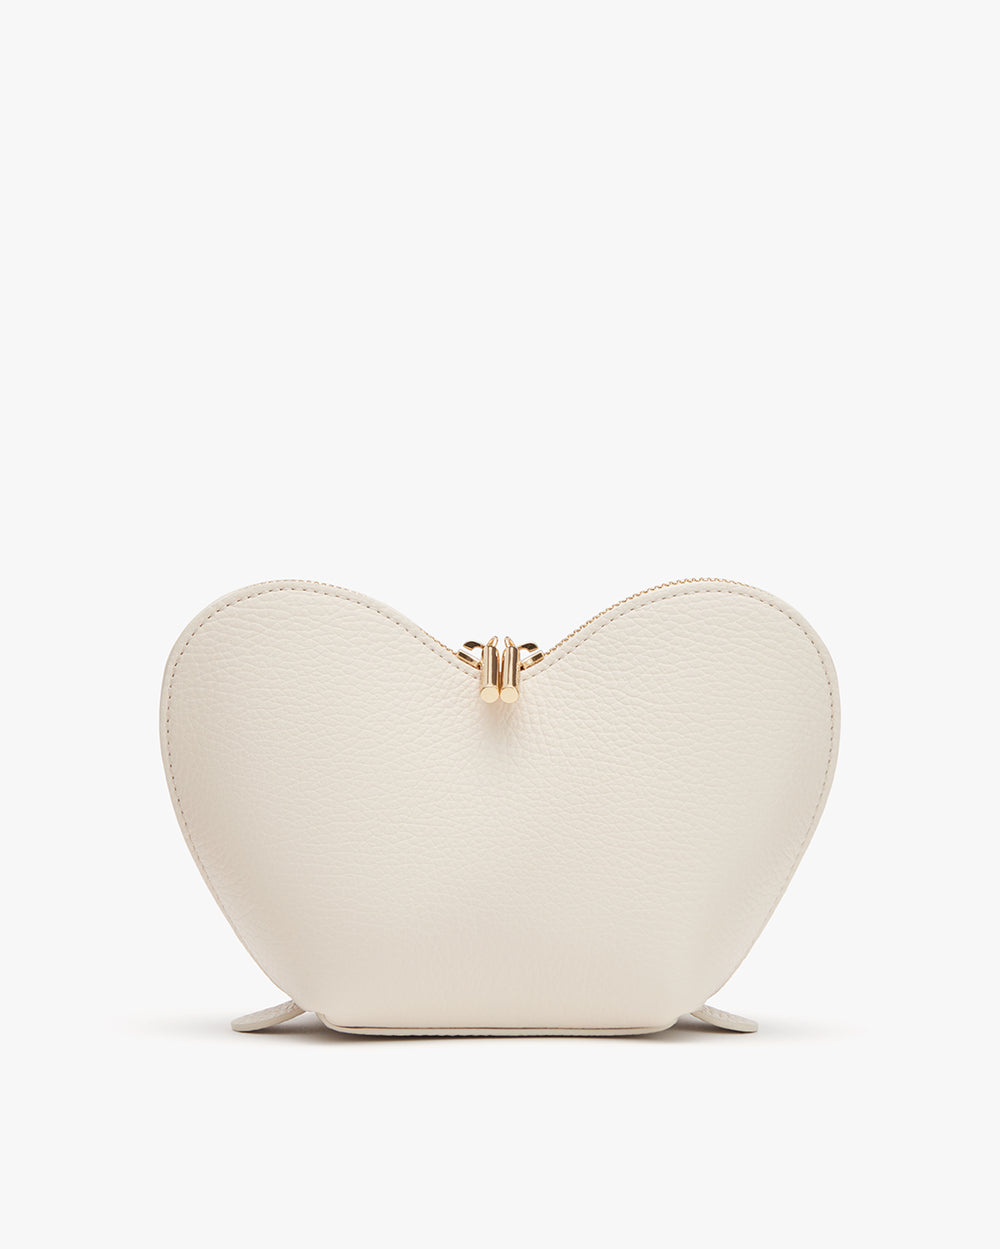 Heart-shaped purse with a clasp closure on a plain background.